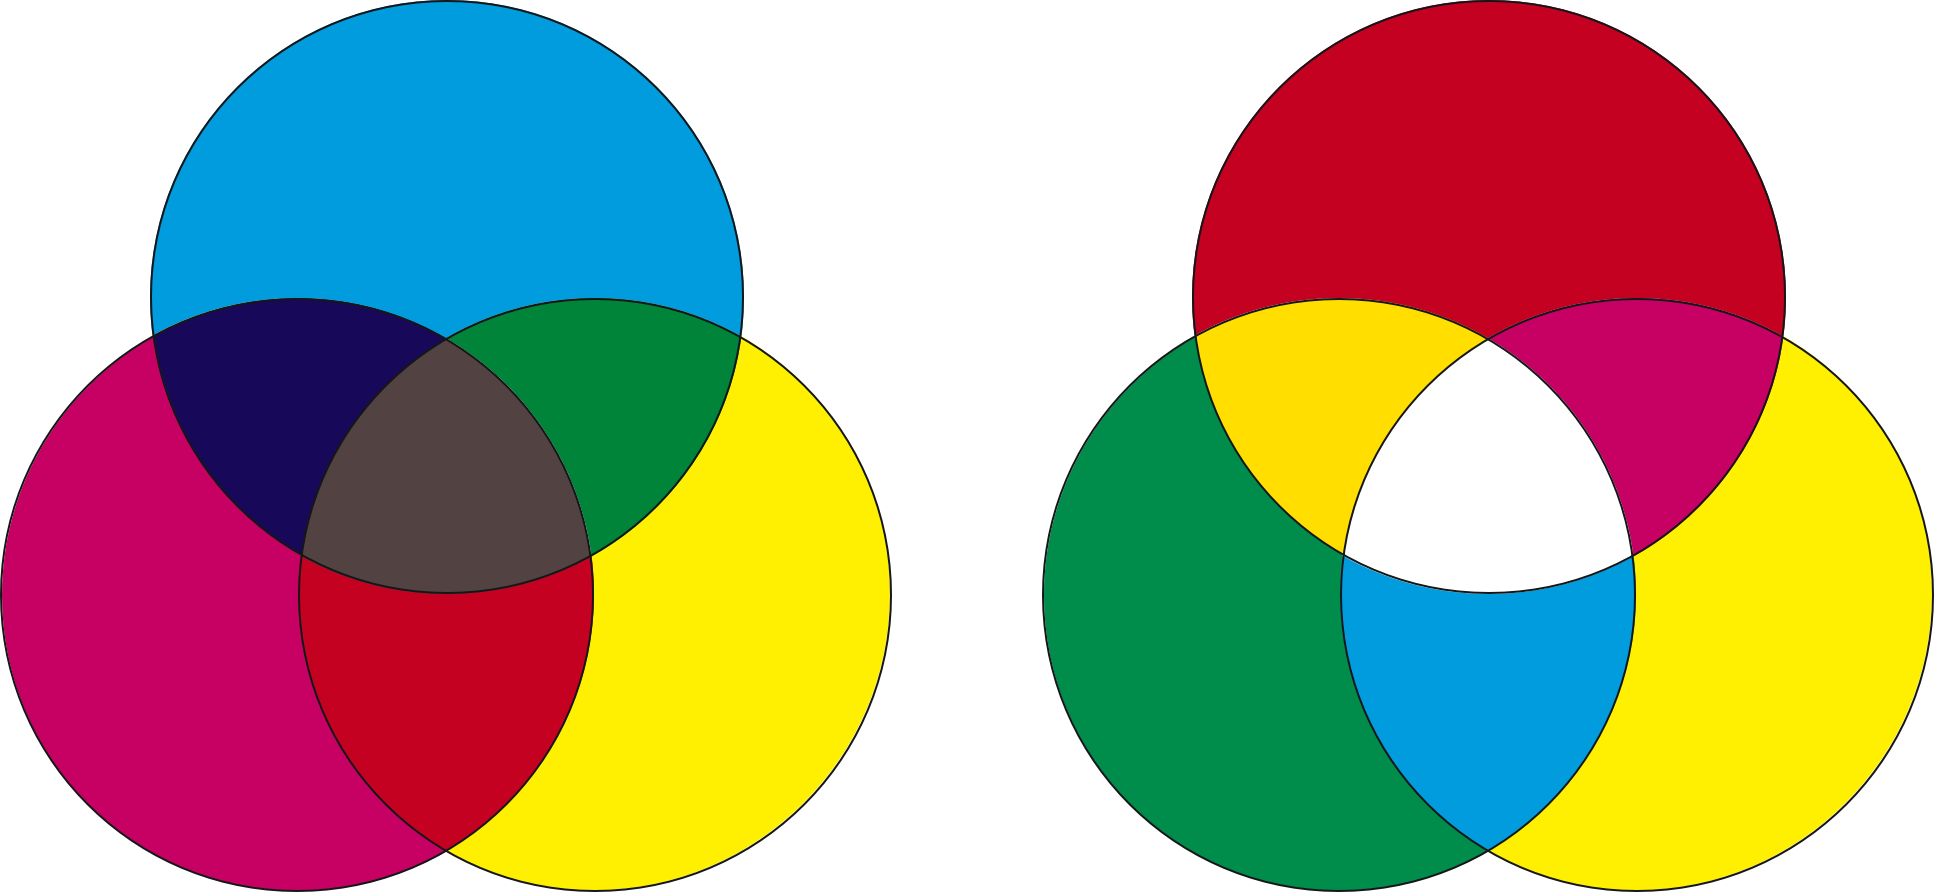 An image featuring two sets of overlapping circles in a Venn diagram layout on a black background. On the left, the primary colors of additive color theory (red, green, blue) are overlaid to demonstrate the formation of secondary colors (cyan, magenta, yellow) where they intersect, with the center showing black, representing the combination of all colors in the RGB model. On the right, the primary colors of subtractive color theory (cyan, magenta, yellow) overlap to form the secondary colors (red, green, blue) with the central overlap appearing white, indicating the absence of color in the CMYK model. This illustrates the difference between additive and subtractive color mixing.